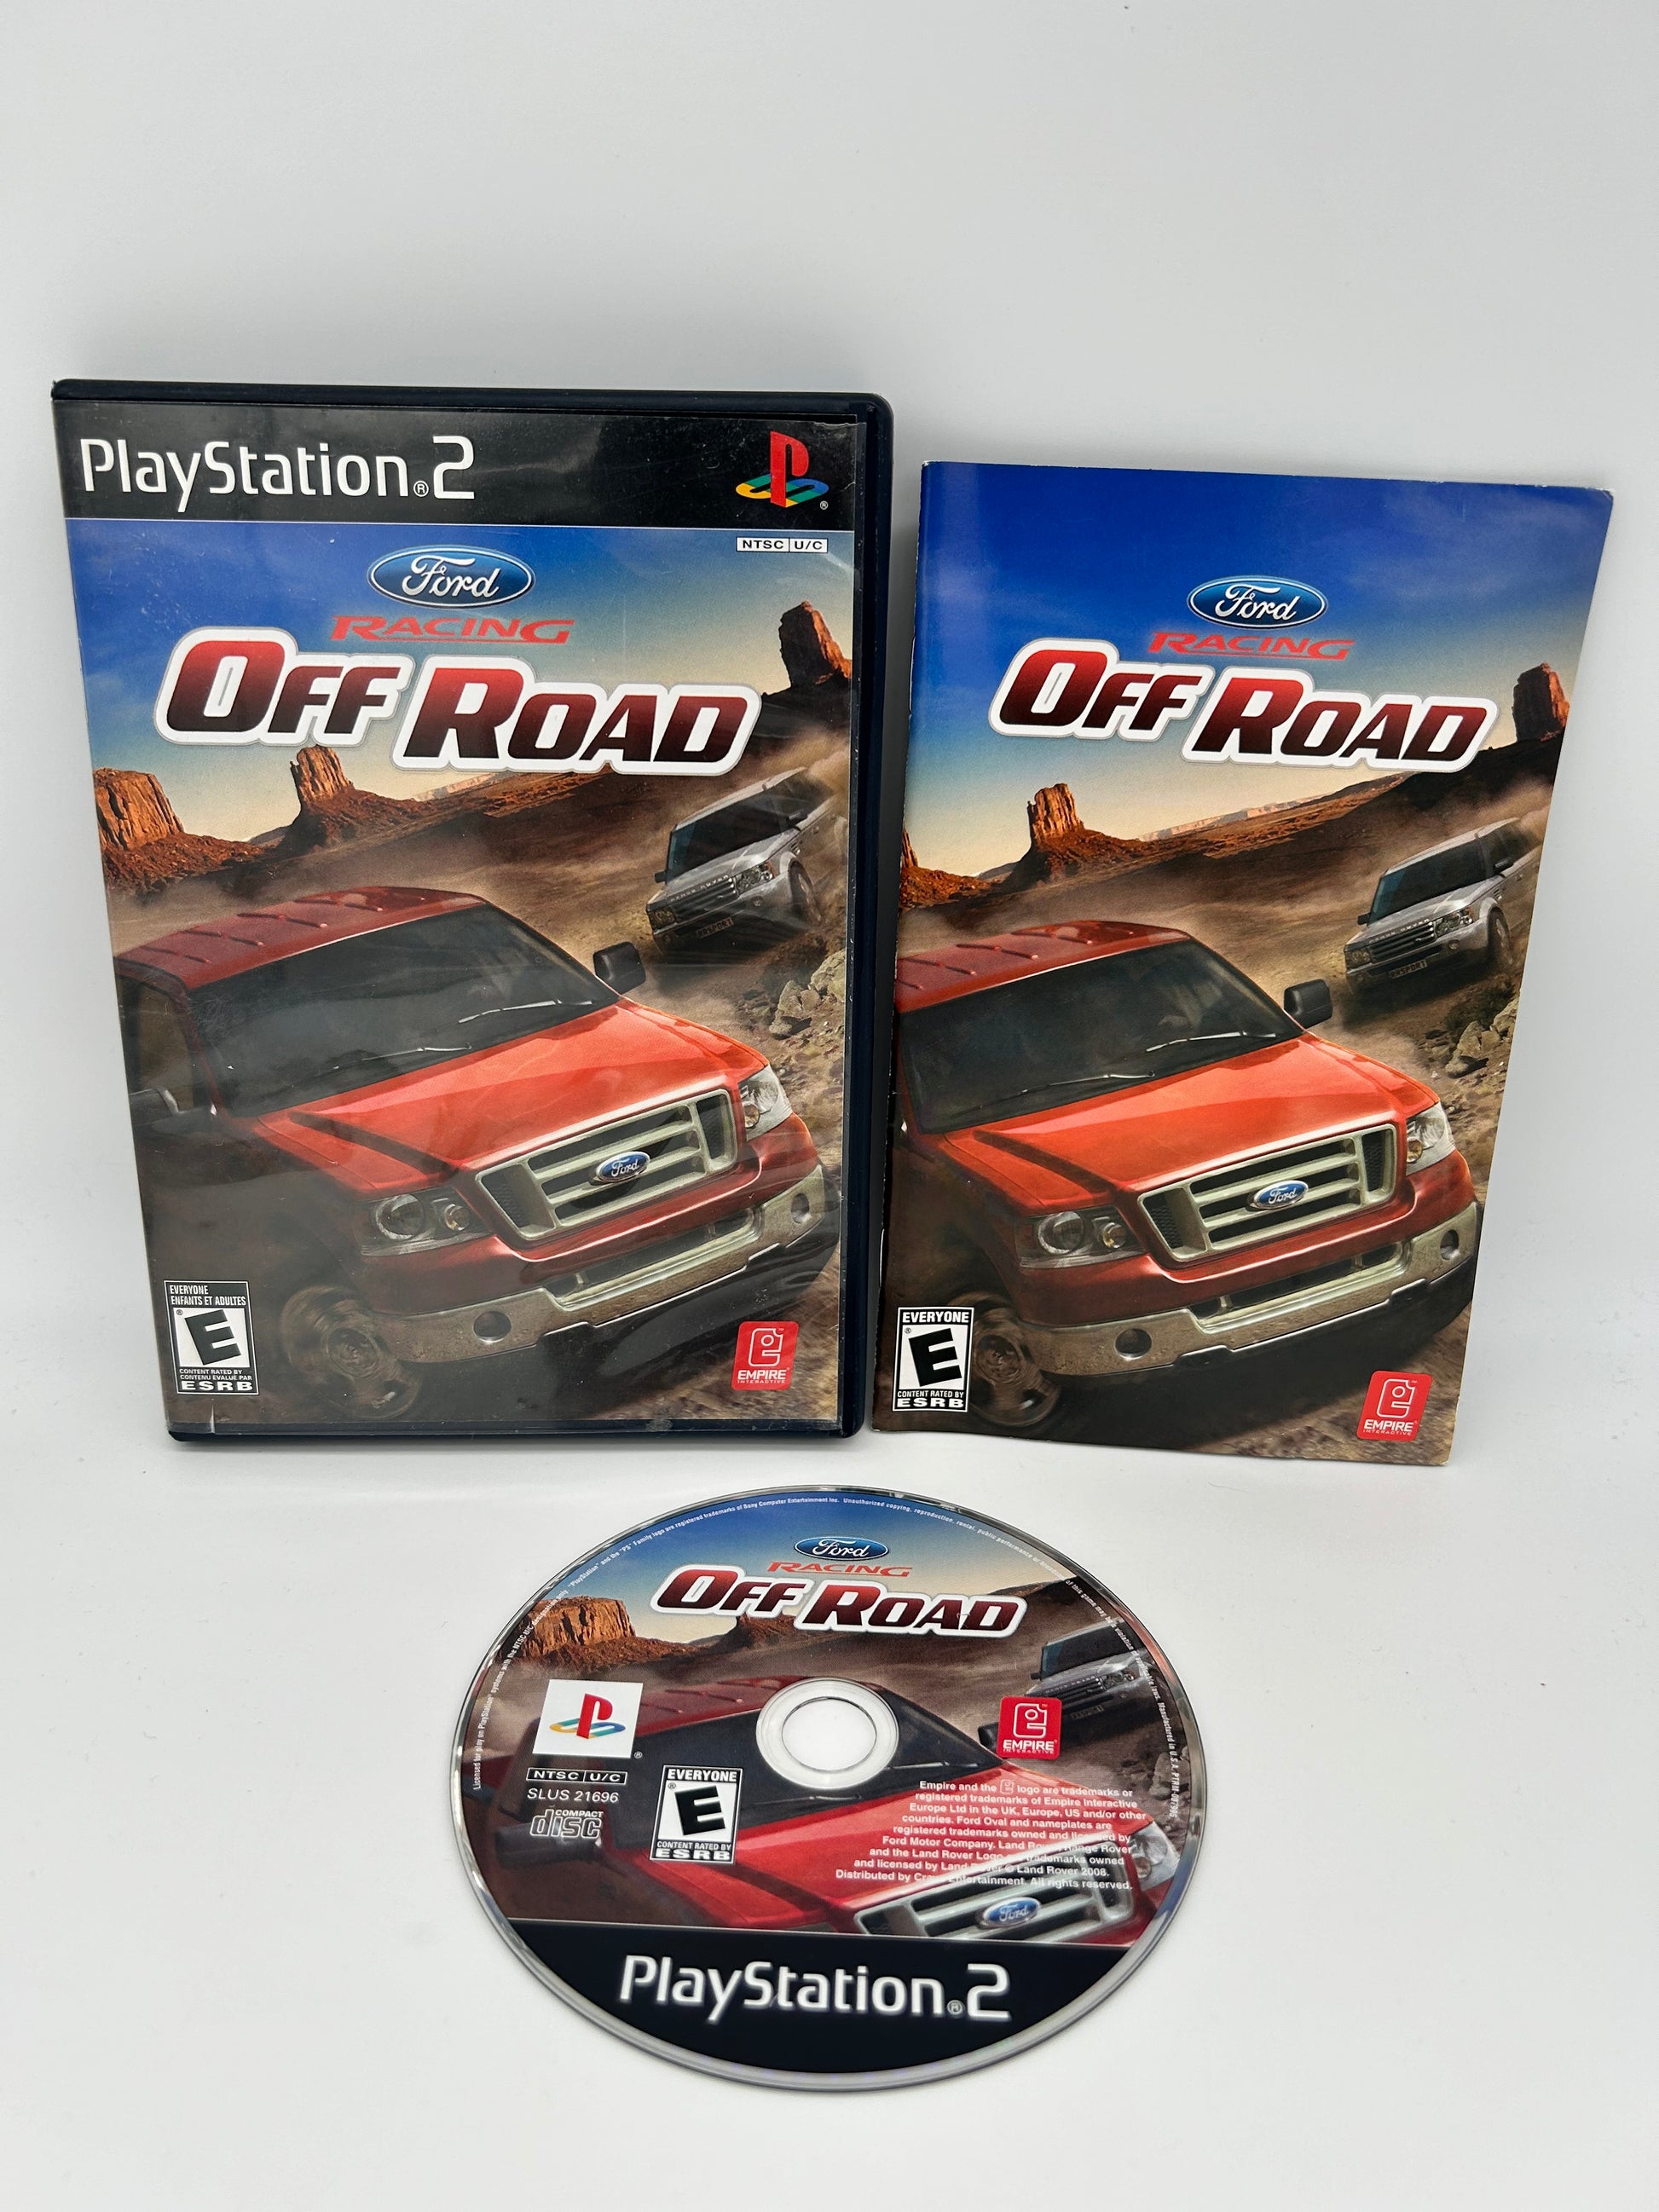 PiXEL-RETRO.COM : SONY PLAYSTATION 2 (PS2) COMPLET CIB BOX MANUAL GAME NTSC FORD RACING OFFROAD